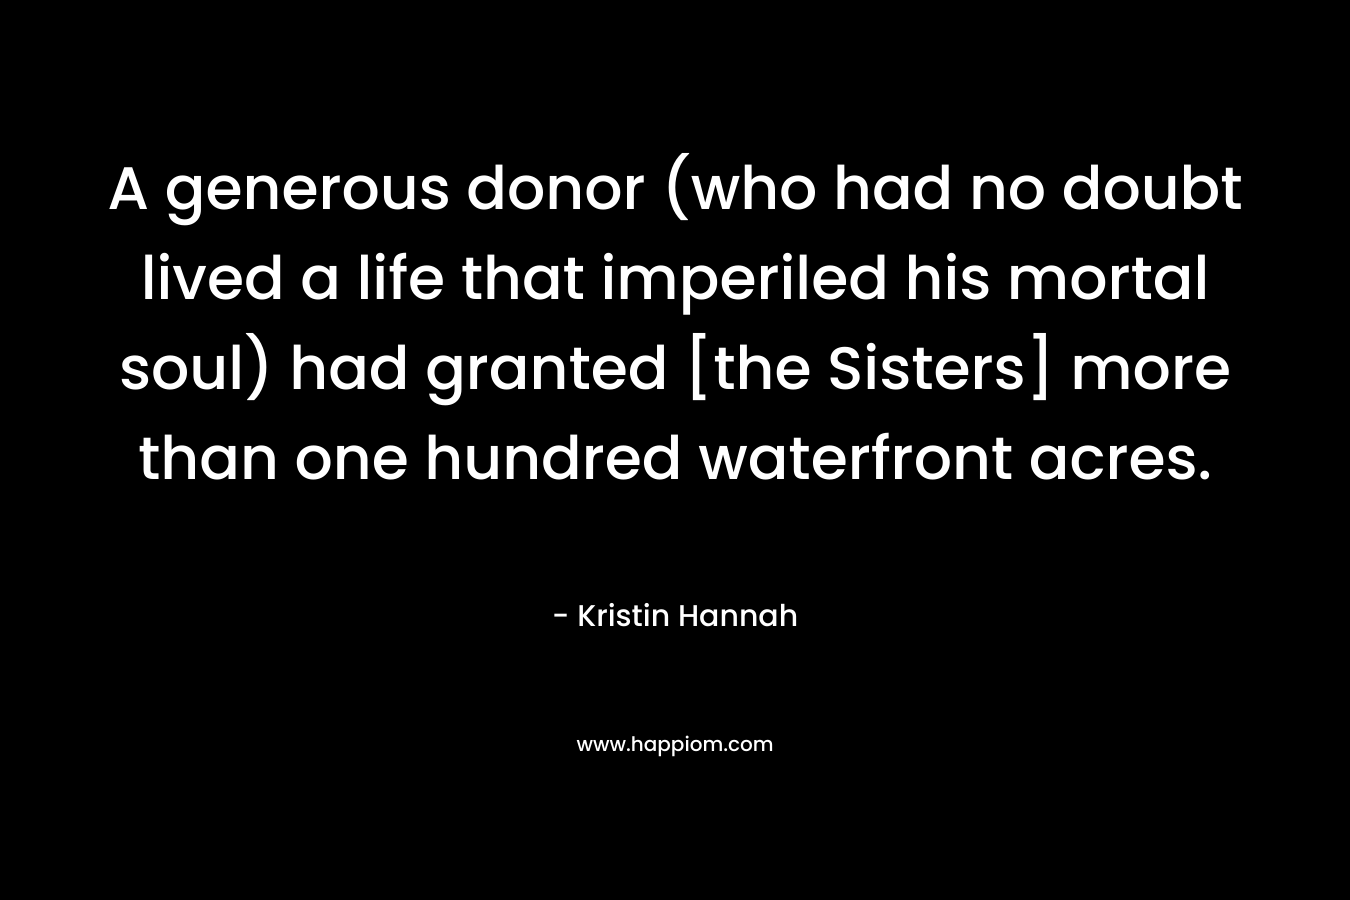 A generous donor (who had no doubt lived a life that imperiled his mortal soul) had granted [the Sisters] more than one hundred waterfront acres. – Kristin Hannah